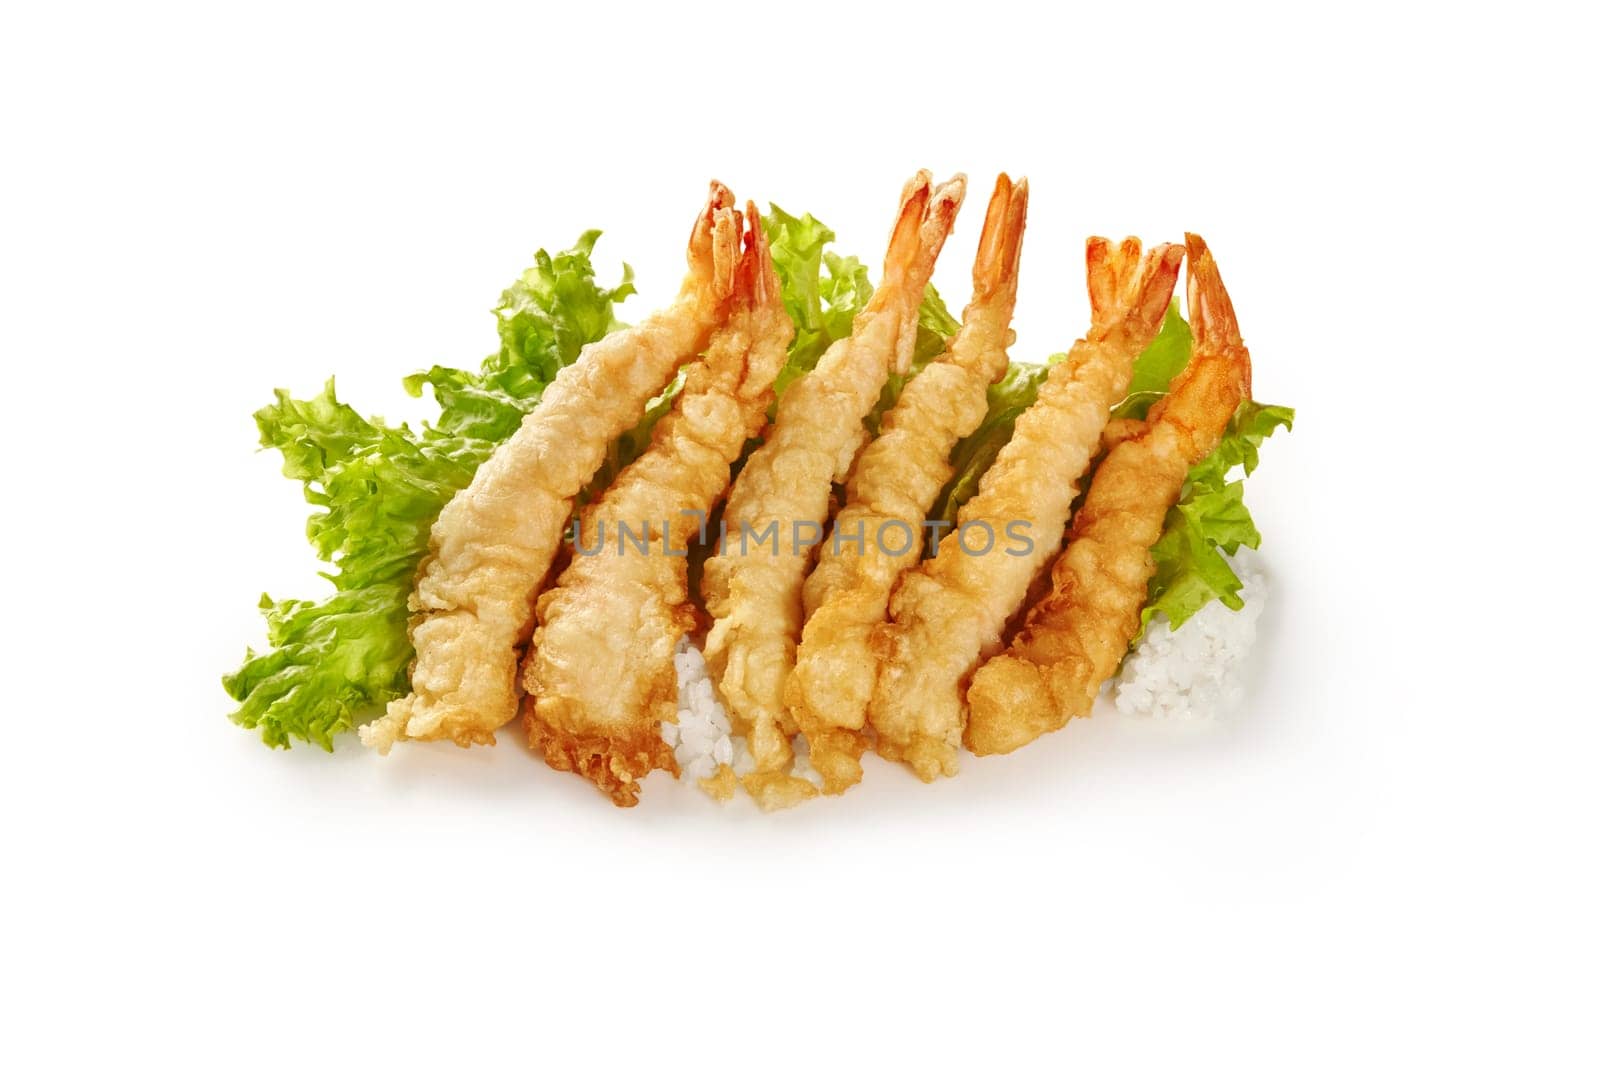 Appetizing golden shrimp tempura lined atop bed of rice and fresh green lettuce isolated on white background. Concept of Japanese inspired meal